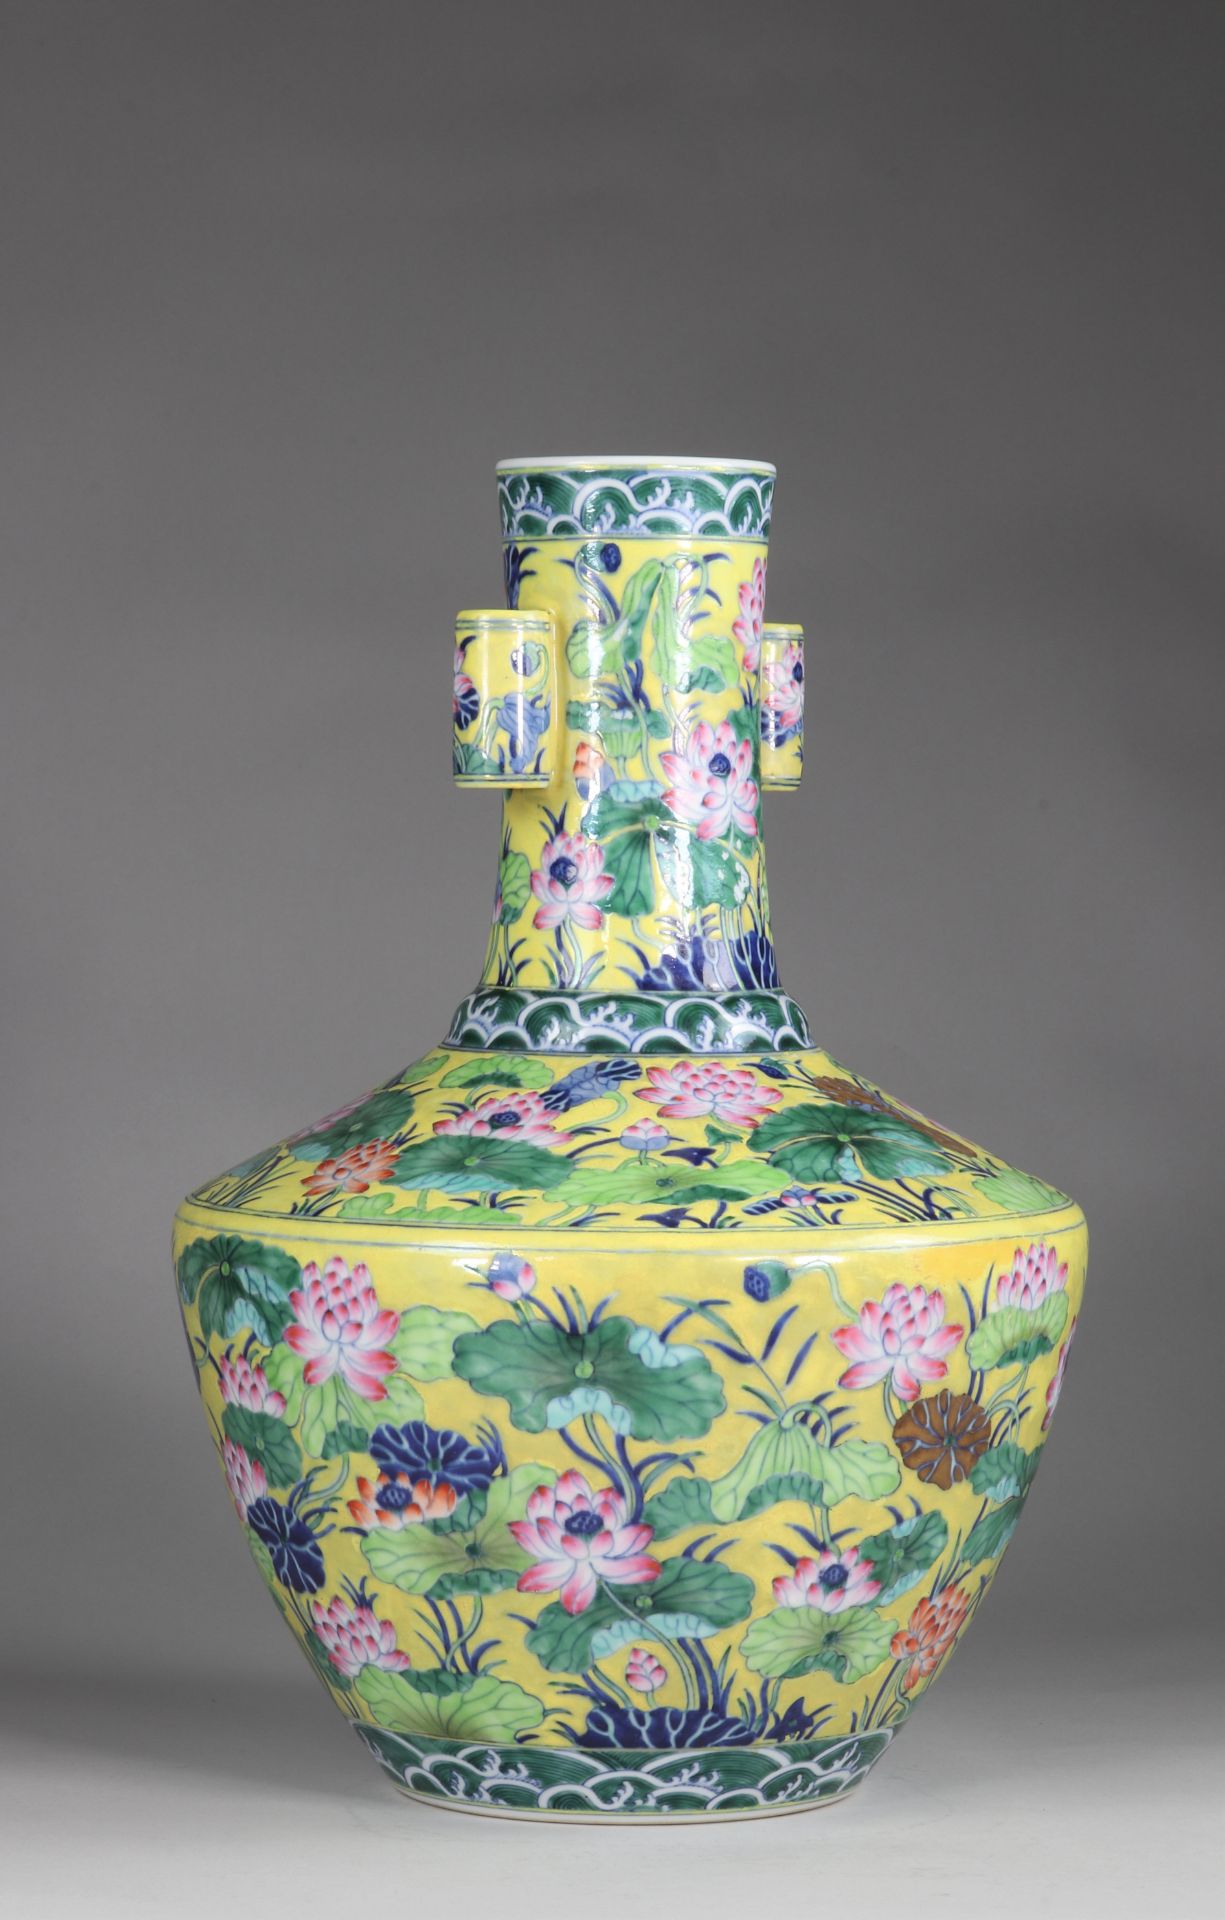 CHINA vase of archaic shape, known as -HU-, created during the Reign of Emperor Qianlong (1736-1795) - Image 2 of 9